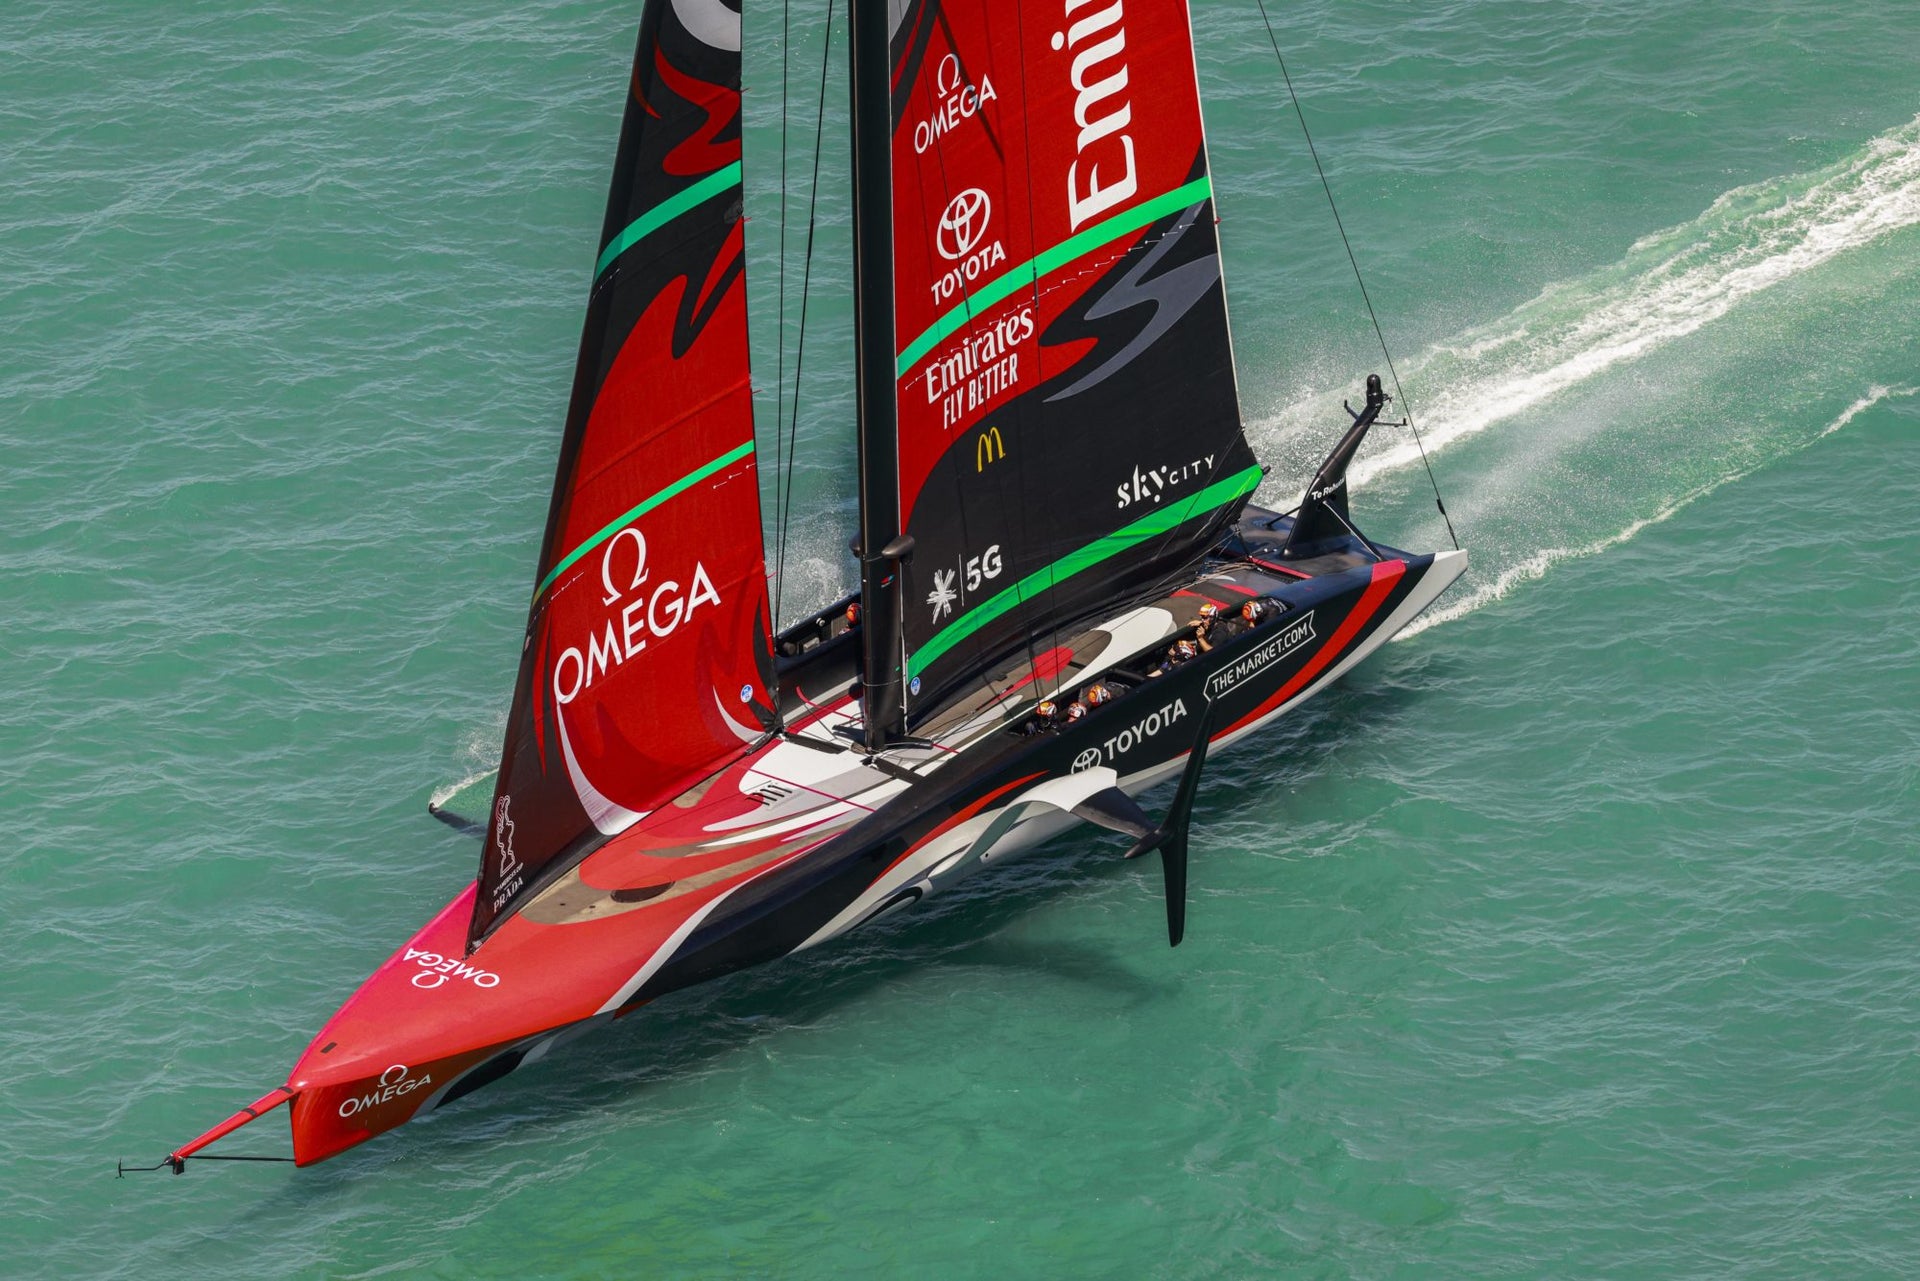 WHAT YOU GOT THERE EMIRATES TEAM NEW ZEALAND?